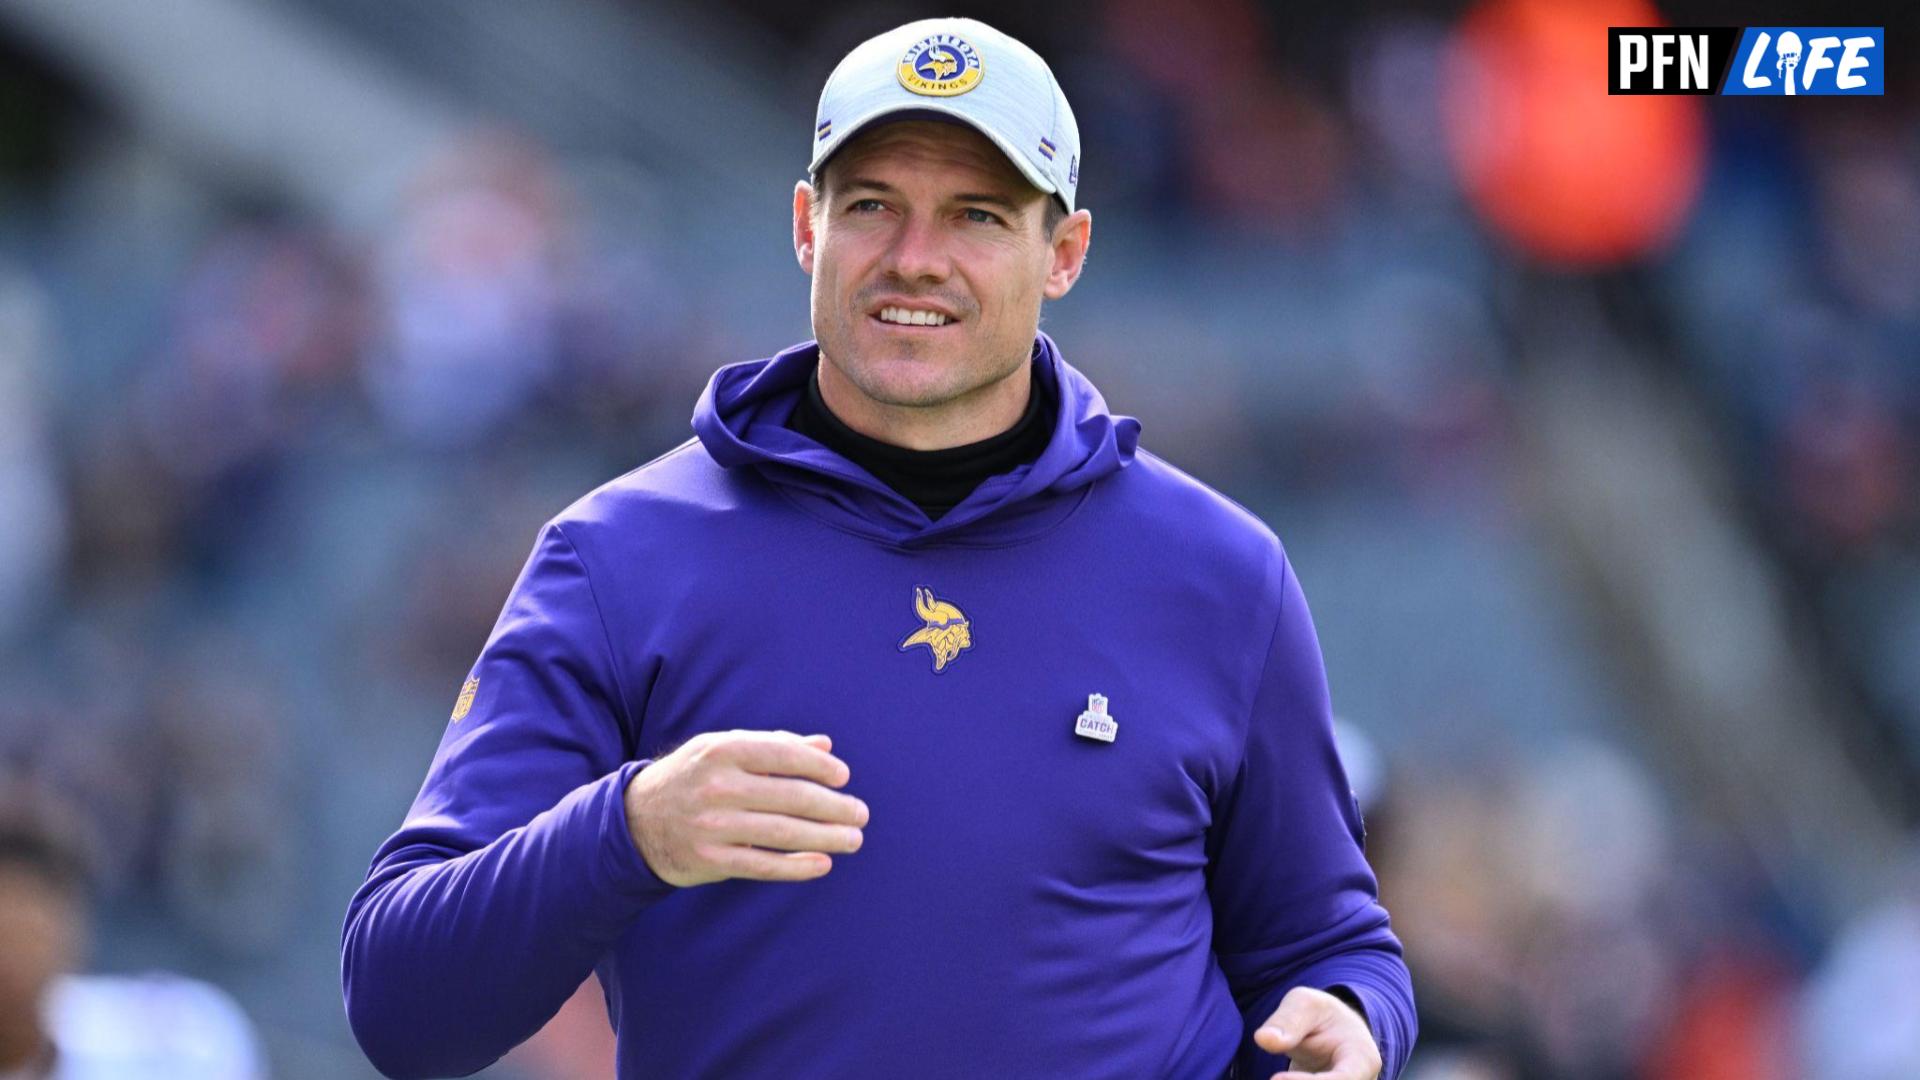 Minnesota Vikings head coach Kevin O'Connell runs off the field after pregame warmups before a game against the Chicago Bears at Soldier Field.